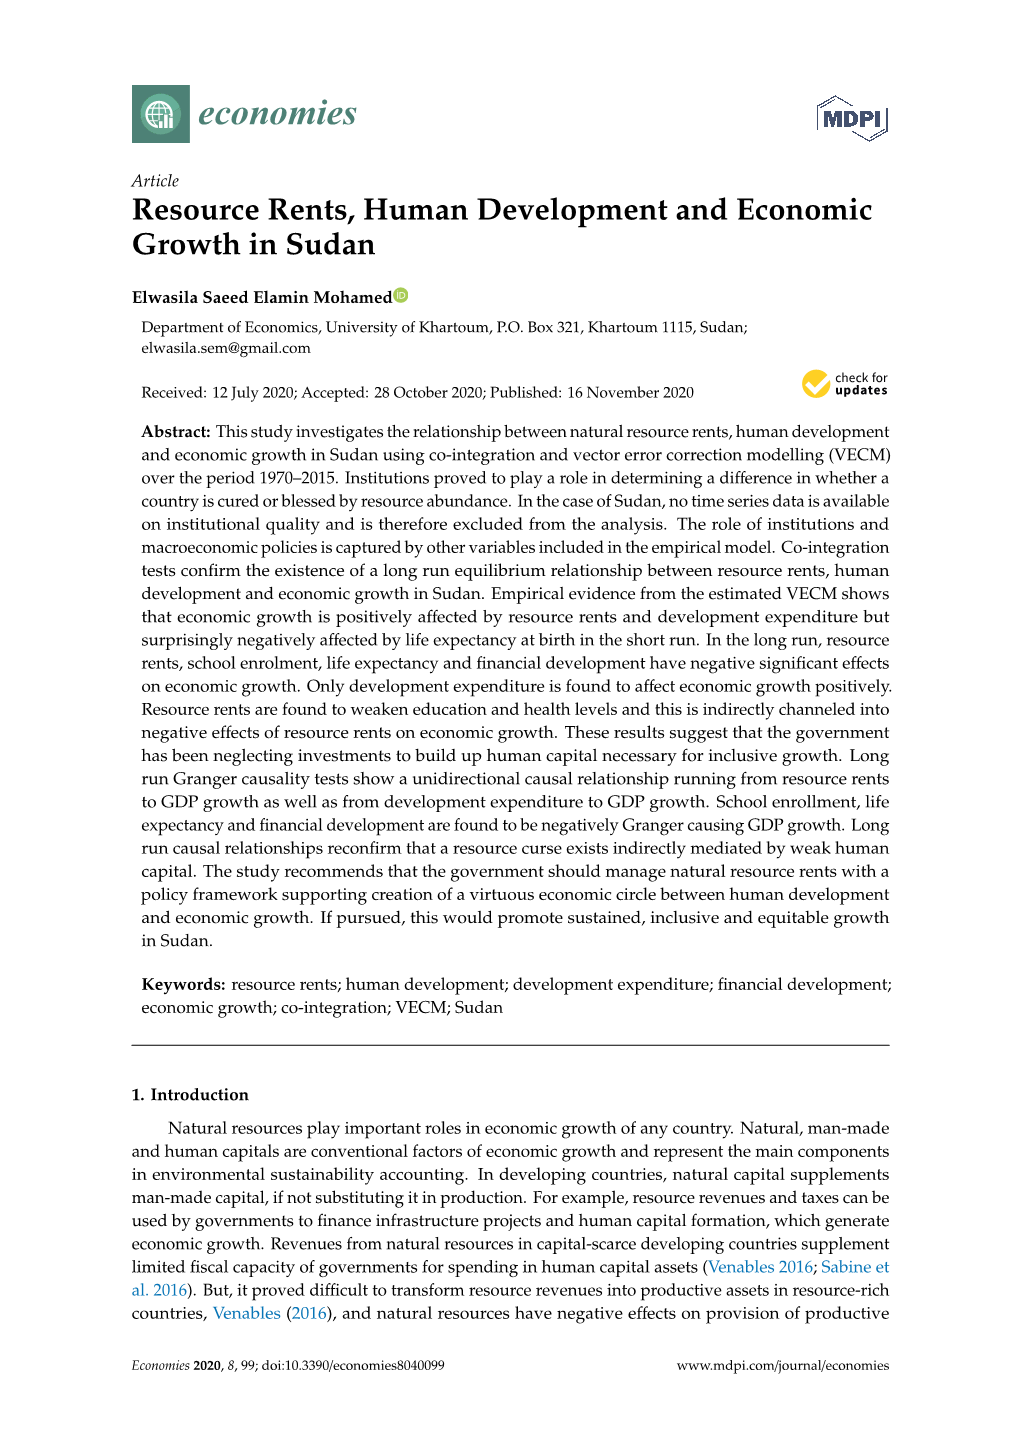 Resource Rents, Human Development and Economic Growth in Sudan